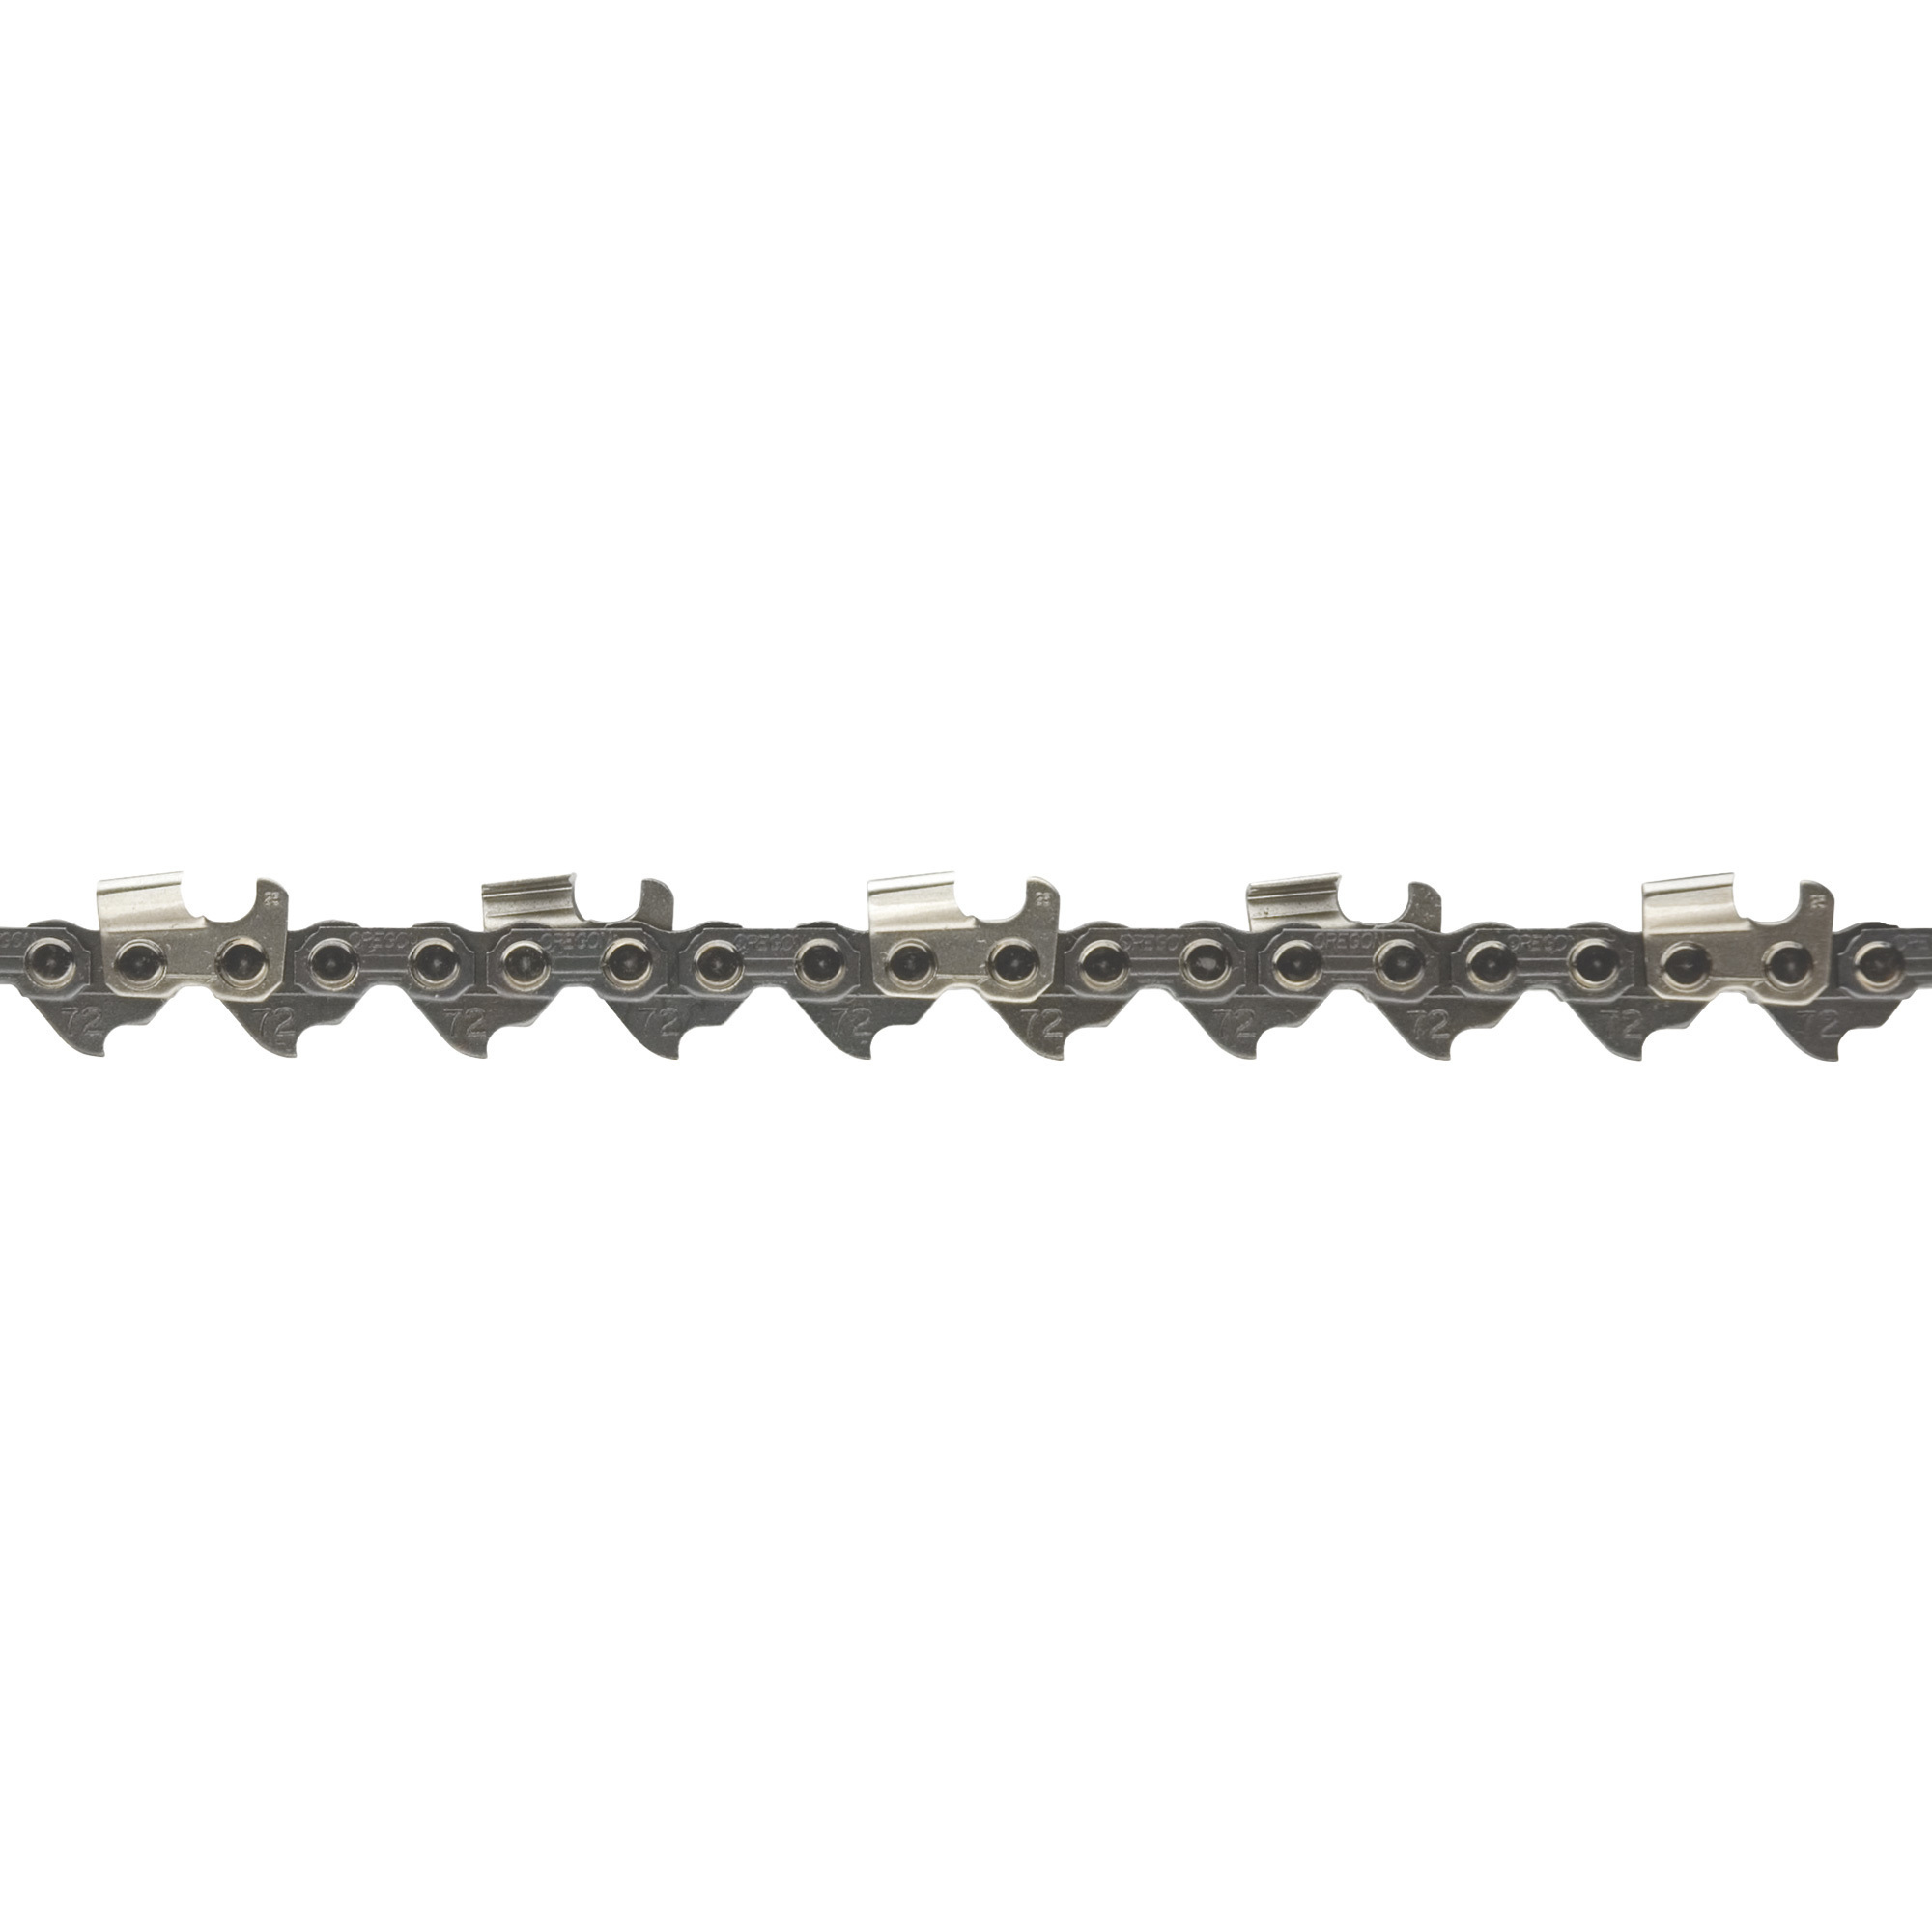 Oregon RipCut Ripping Chainsaw Chain, 3/8Inch Chain Pitch, 0.050 Chain Gauge, 70 Drive Links, Model 72RD070G